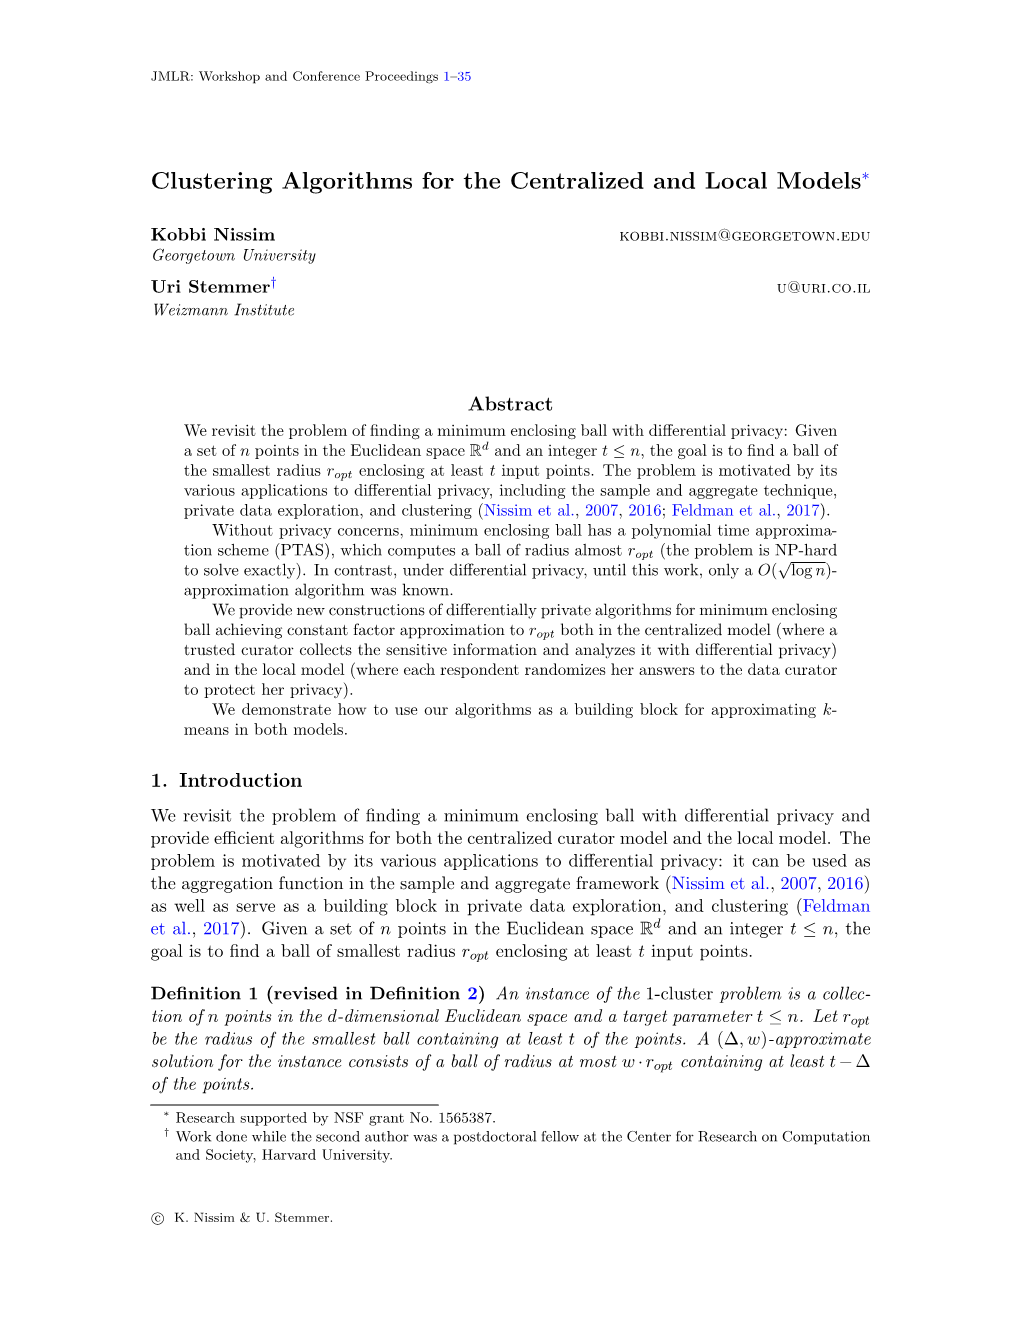 Clustering Algorithms for the Centralized and Local Models∗